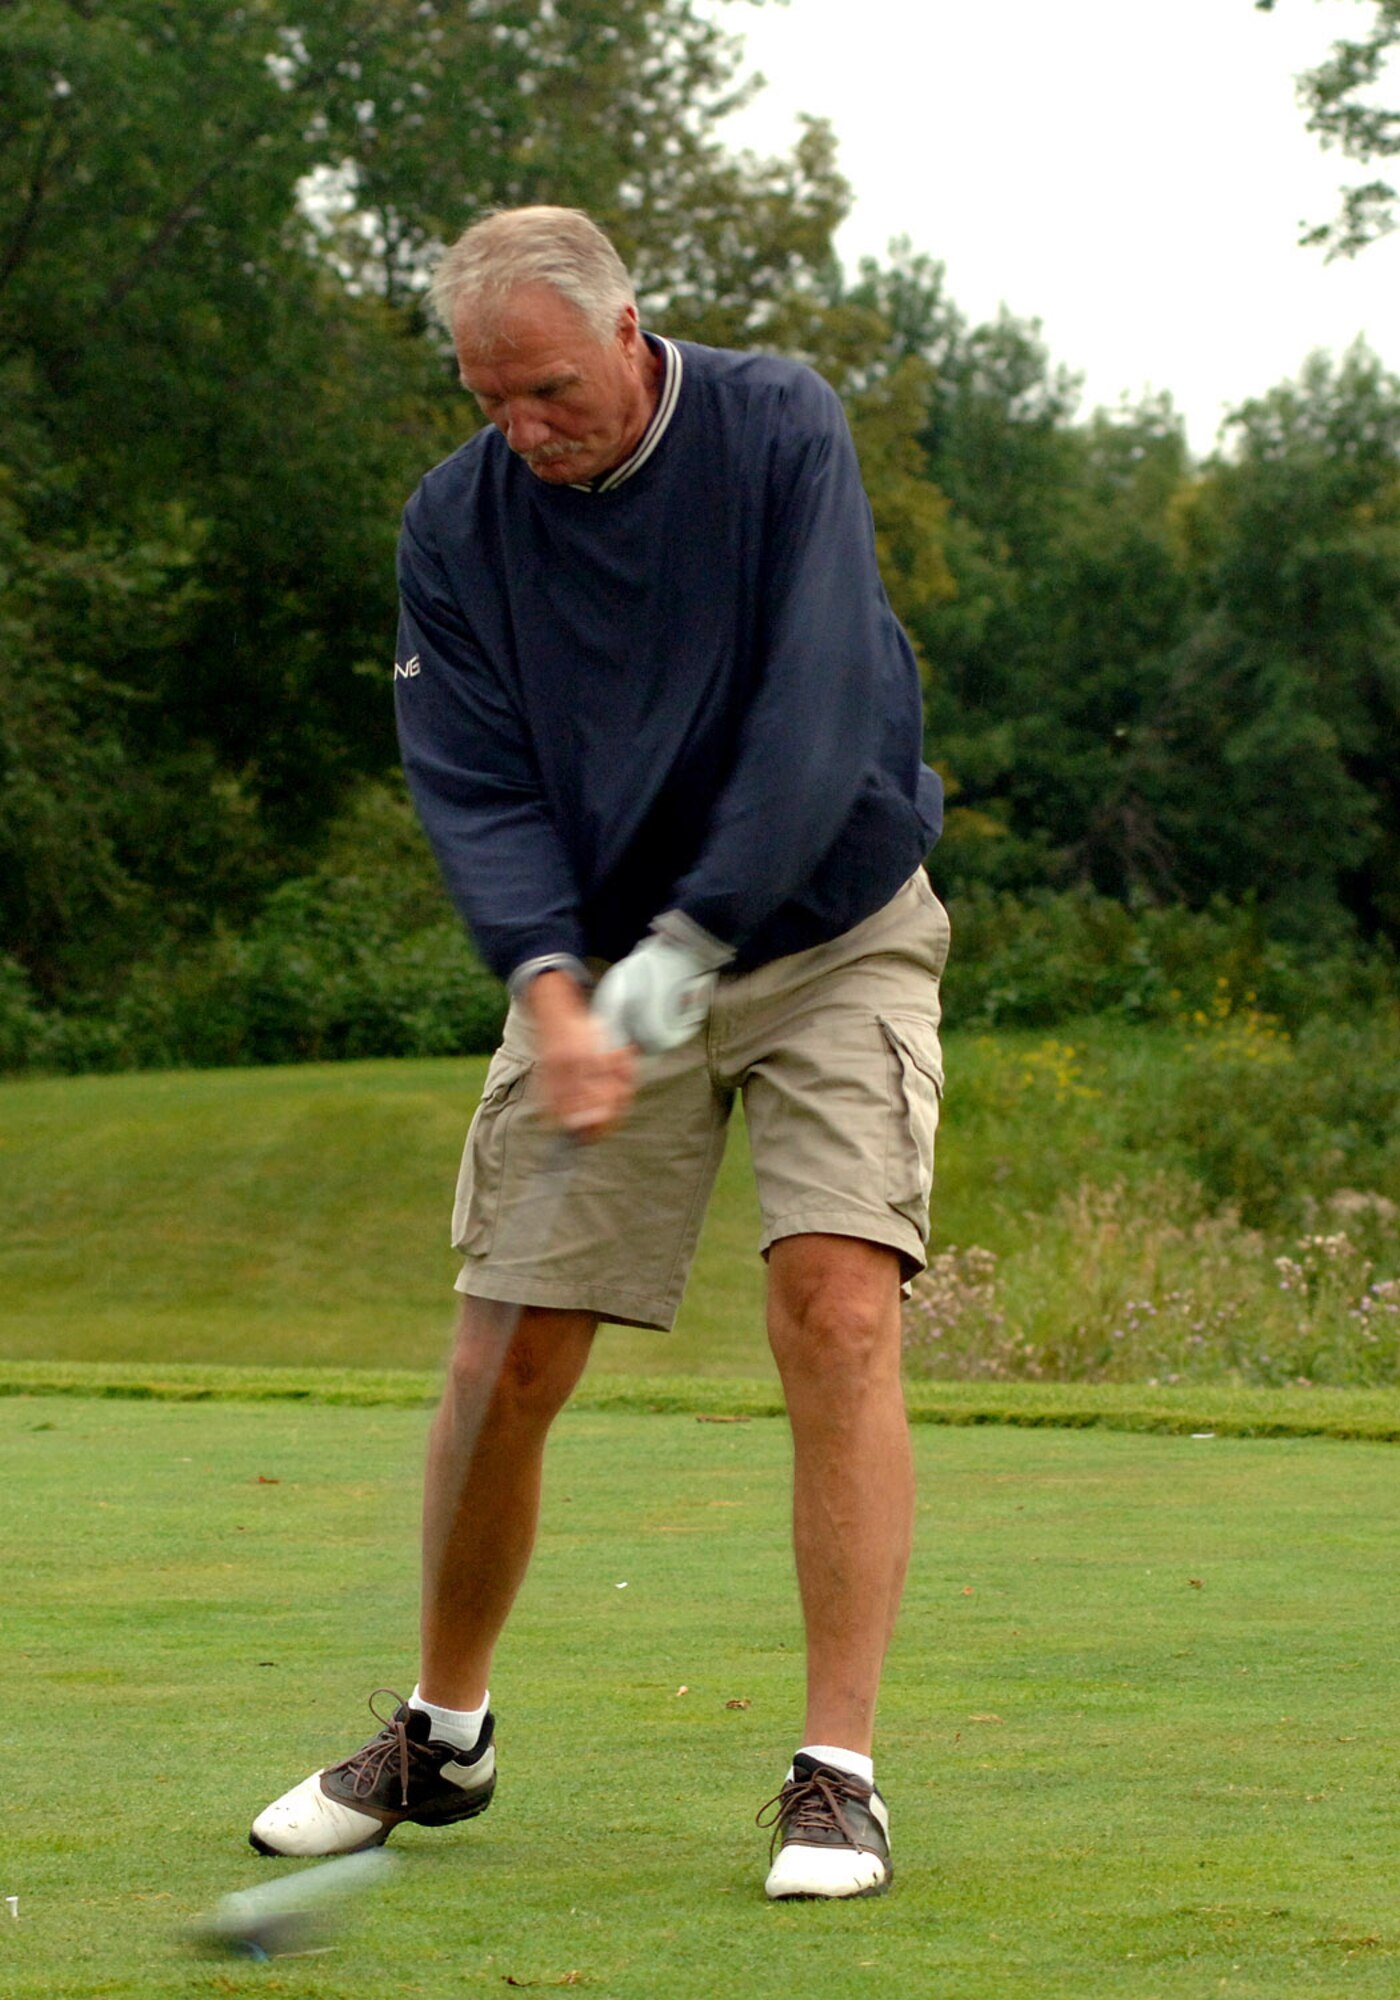 GRAND FORKS AIR FORCE BASE, N.D. -- Mr. Jerry Hasbrouck, 319th Maintenance Operations Squadron honorary commander, chips his golf ball onto the green the annual Grand Forks Military Appreciation Committee golf tournament. Teams comprised of both military and civilian leaders, spent the morning of Aug. 6 in friendly competition including longest drive, longest putt and closest to the hole contests. (U.S. Air Force photo/Senior Airman SerMae Lampkin)